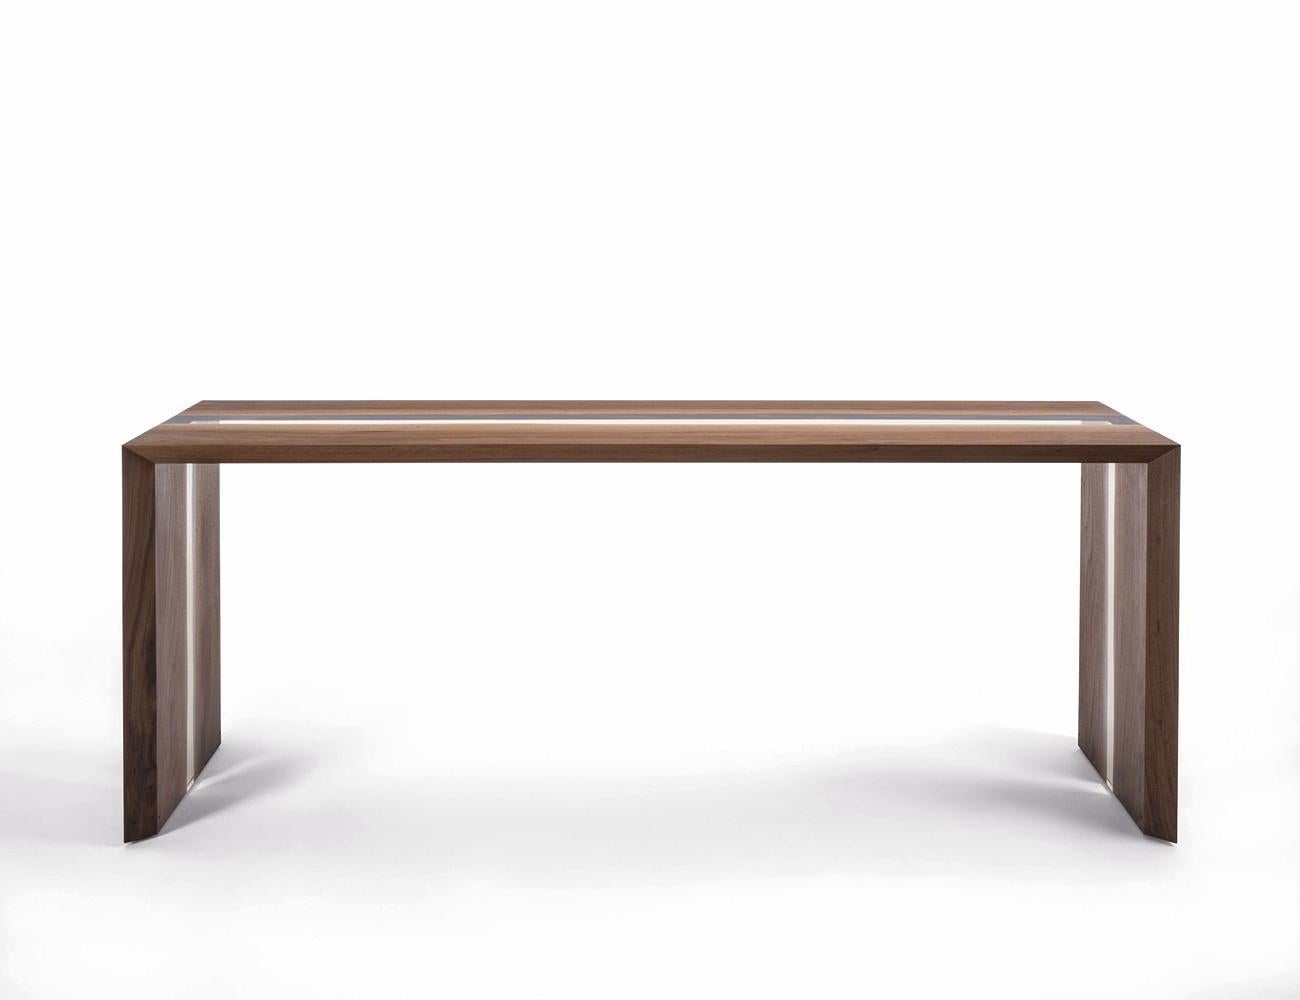 Console Table Resin Linea with solid walnut
wood varnished. With high quality resin in center.
Treated wood with natural pine extract.
Available in:
L 165 x D 49.5 x H 85cm, price: 8900,00€
L 180 x D 49.5 x H 85cm, price: 9900,00€
L 195 x D 49.5 x H